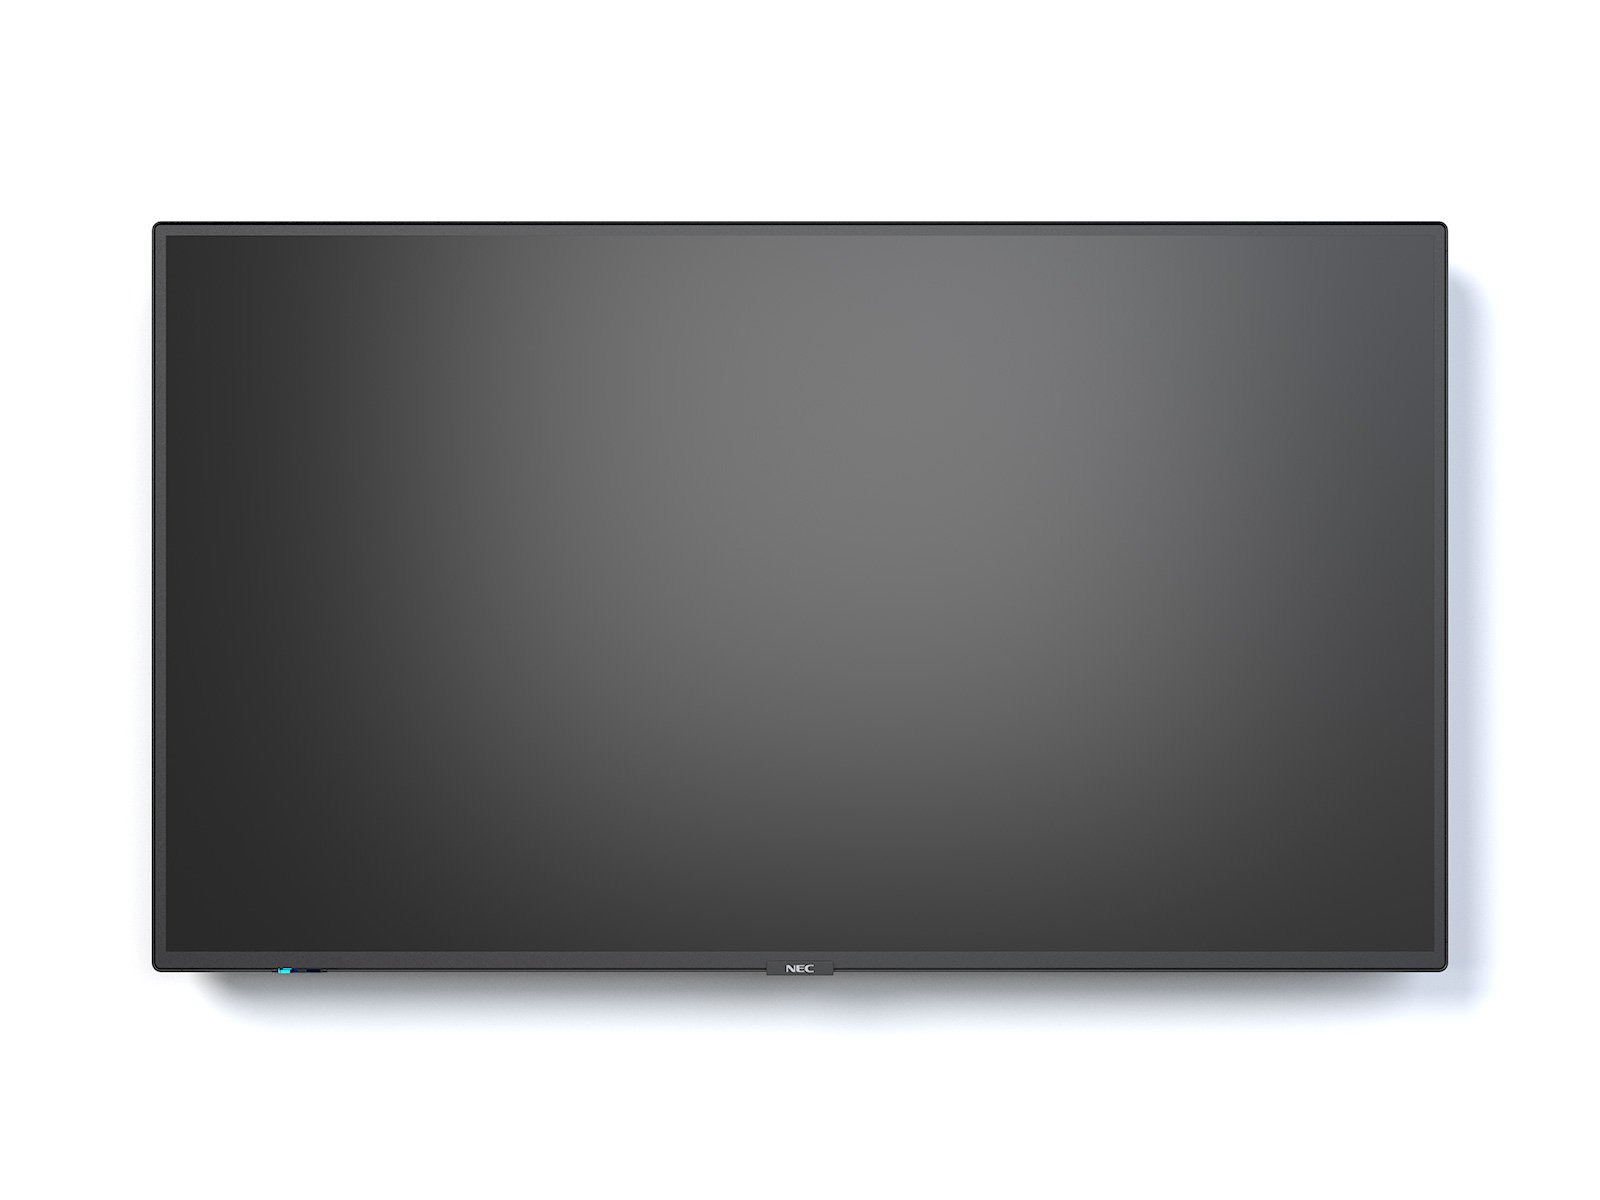 NEC MultiSync M491-MPi4 - 49 Inch - 500 cd/m² - Ultra-HD - 3840x2160 Pixel - 24/7 - NEC MediaPlayer - Message Large Format Display